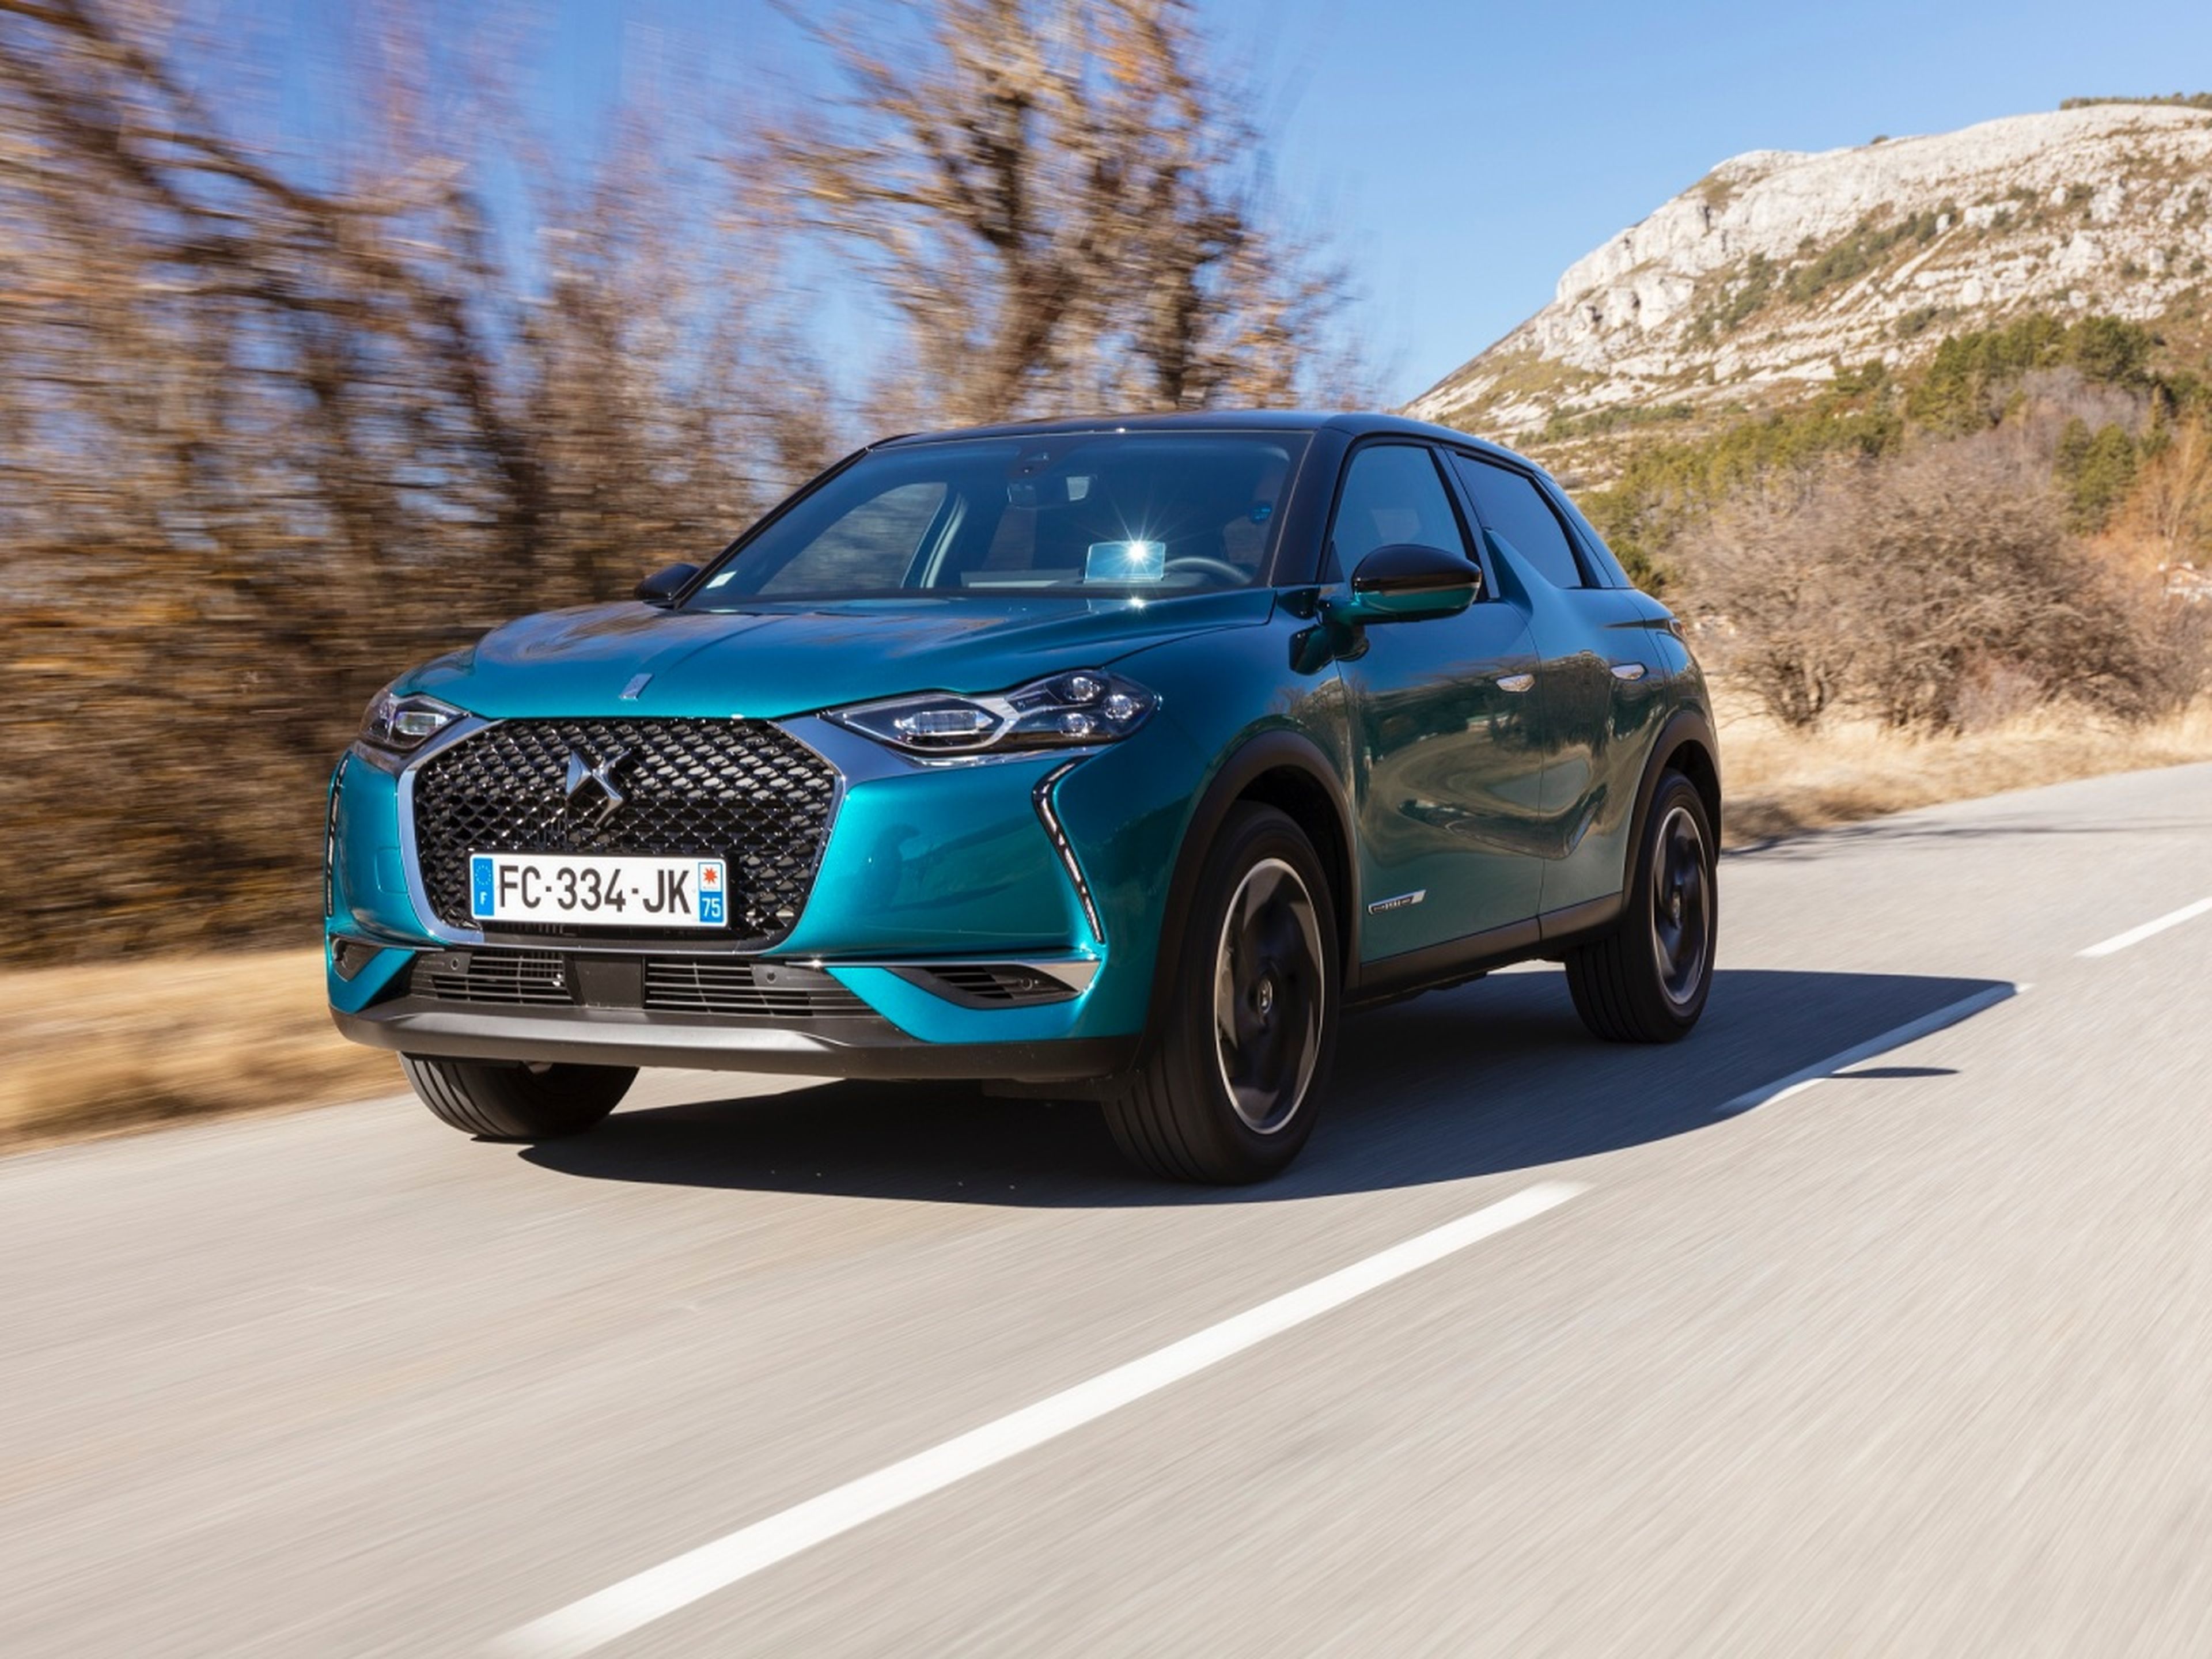 DS 3 Crossback frontal